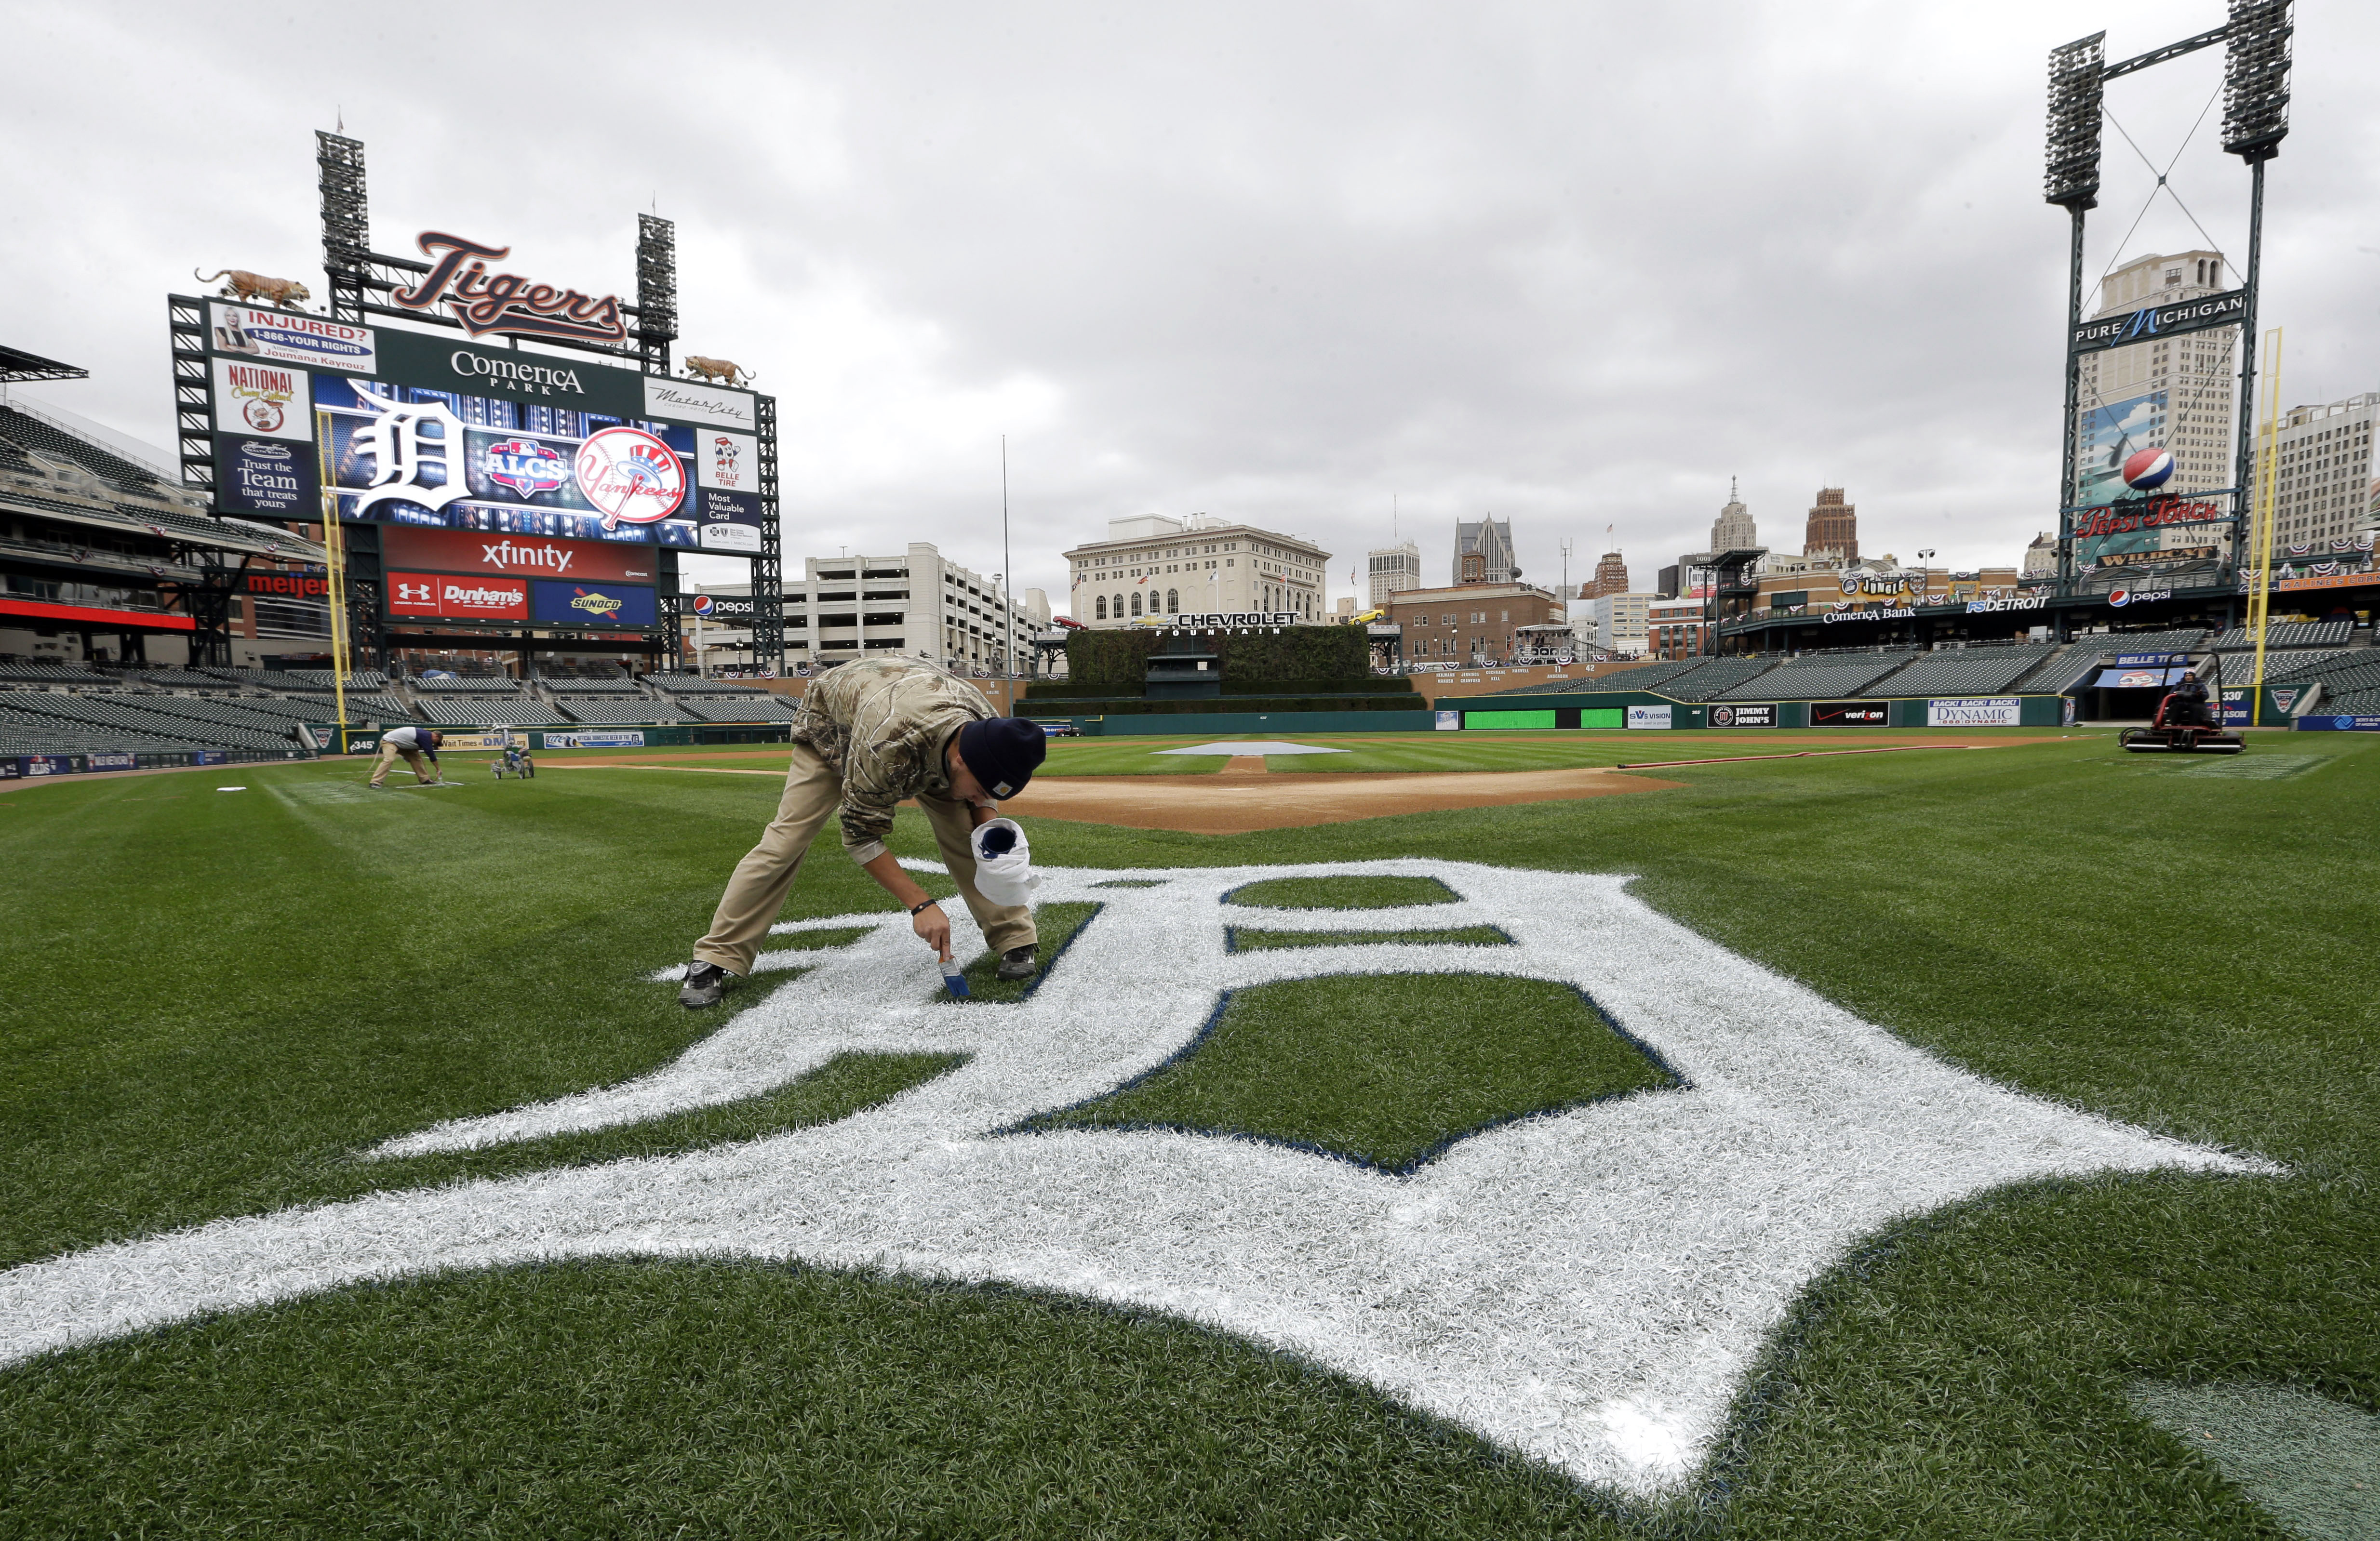 Tigers to host Red Sox in home opener Thursday